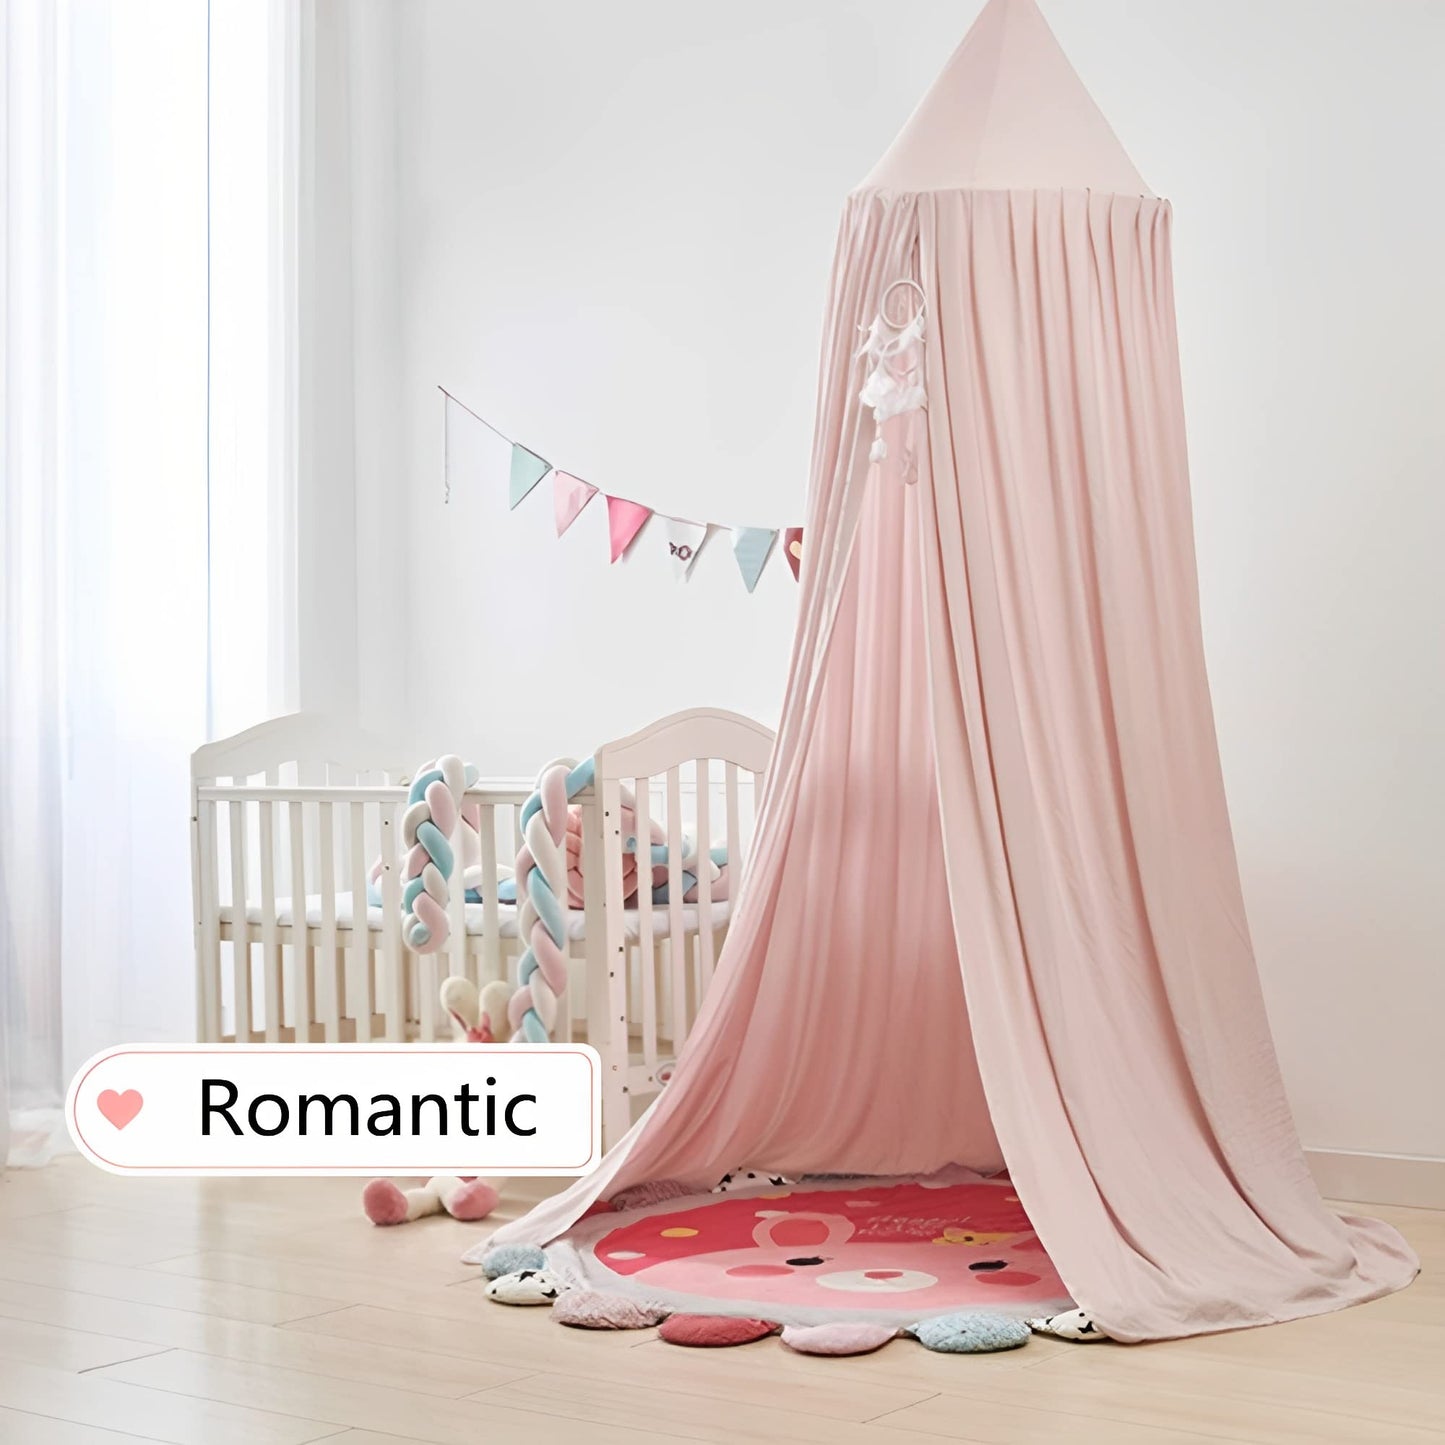 Beauenty Bed Canopy for Girls Room,Princess Bed Canopies for Kids Room,Extra Large Kids Bed Canopy for Girls Boys Bedroom Decor,Soft Smooth Playing Tent Canopy for Decoration,Playing,Reading,Sleep